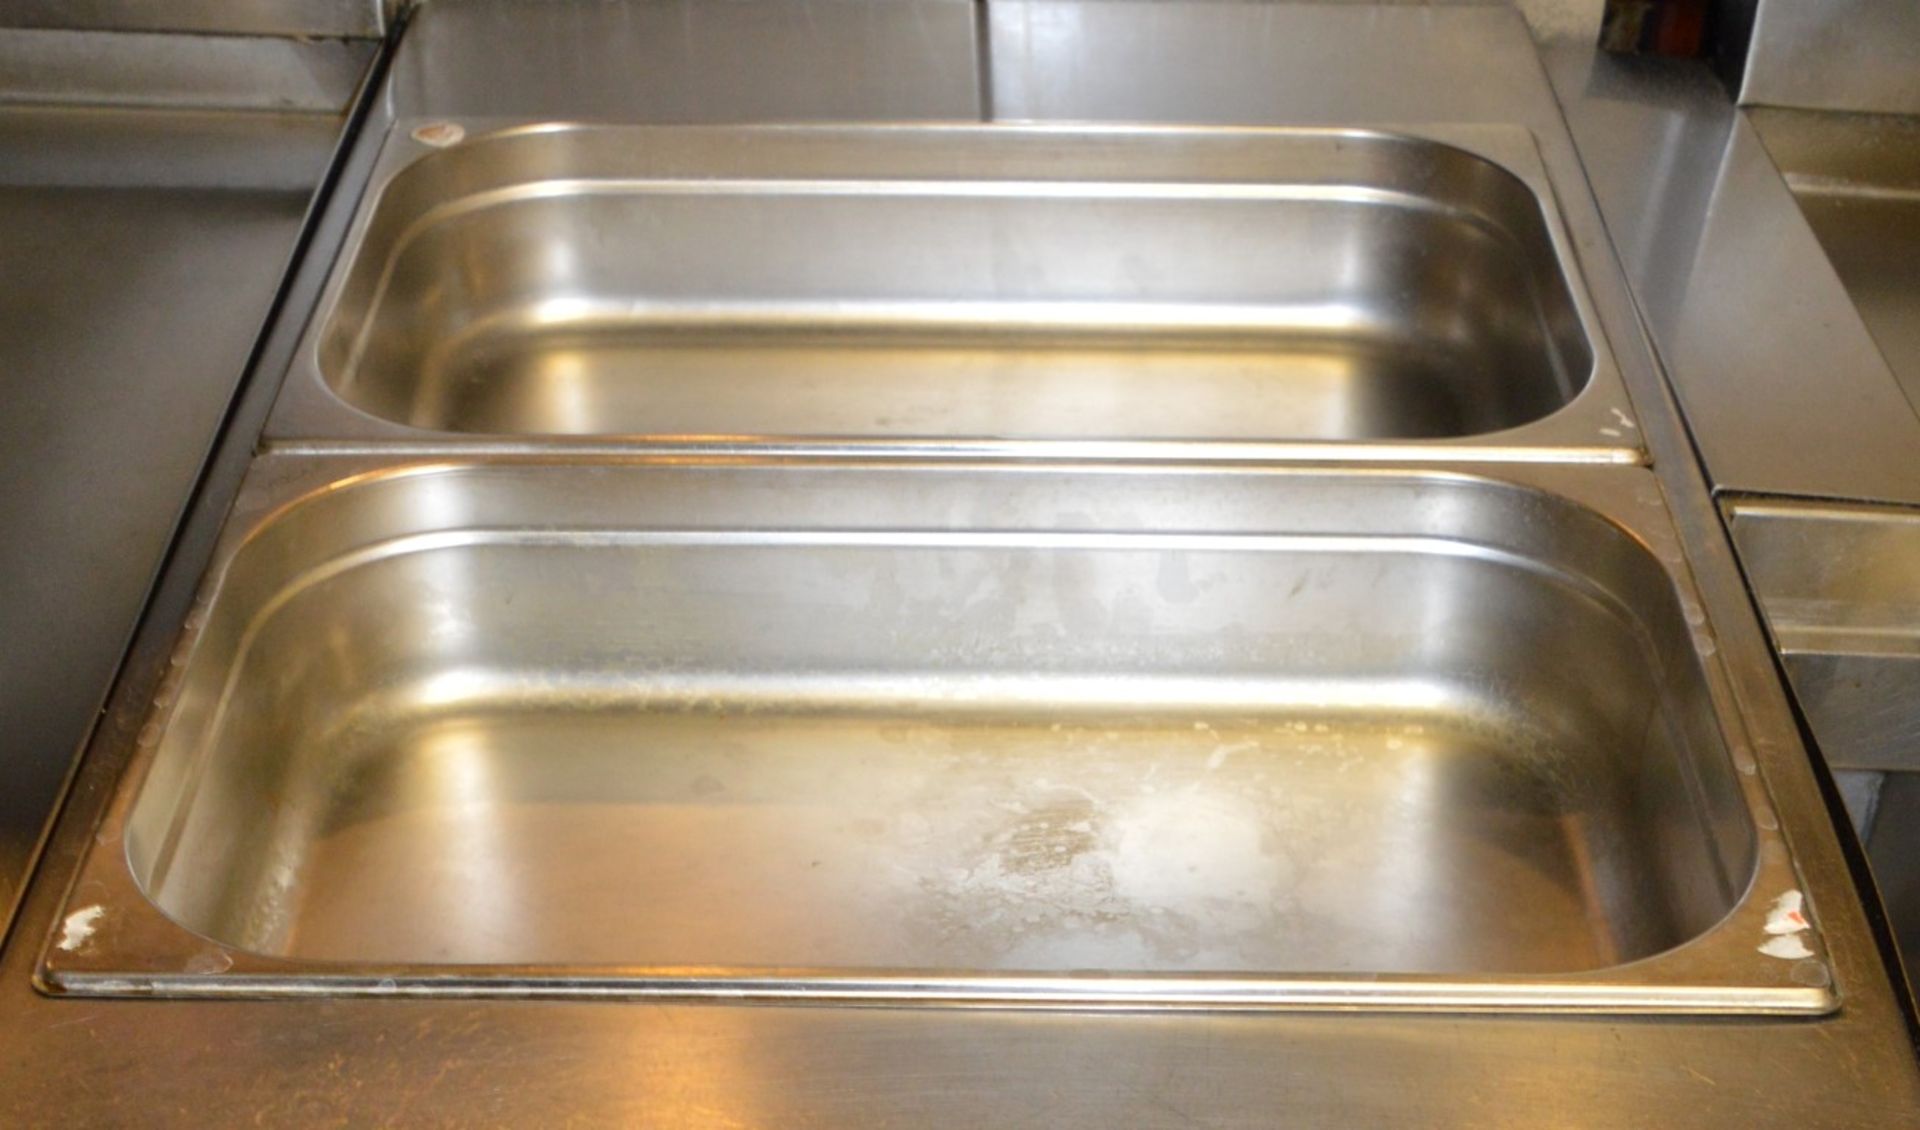 1 x Stainless Steel Commercial Sauce Tray Unit - Includes Two Trays - H80 x W56 x D97 cms - Ref - Image 3 of 4